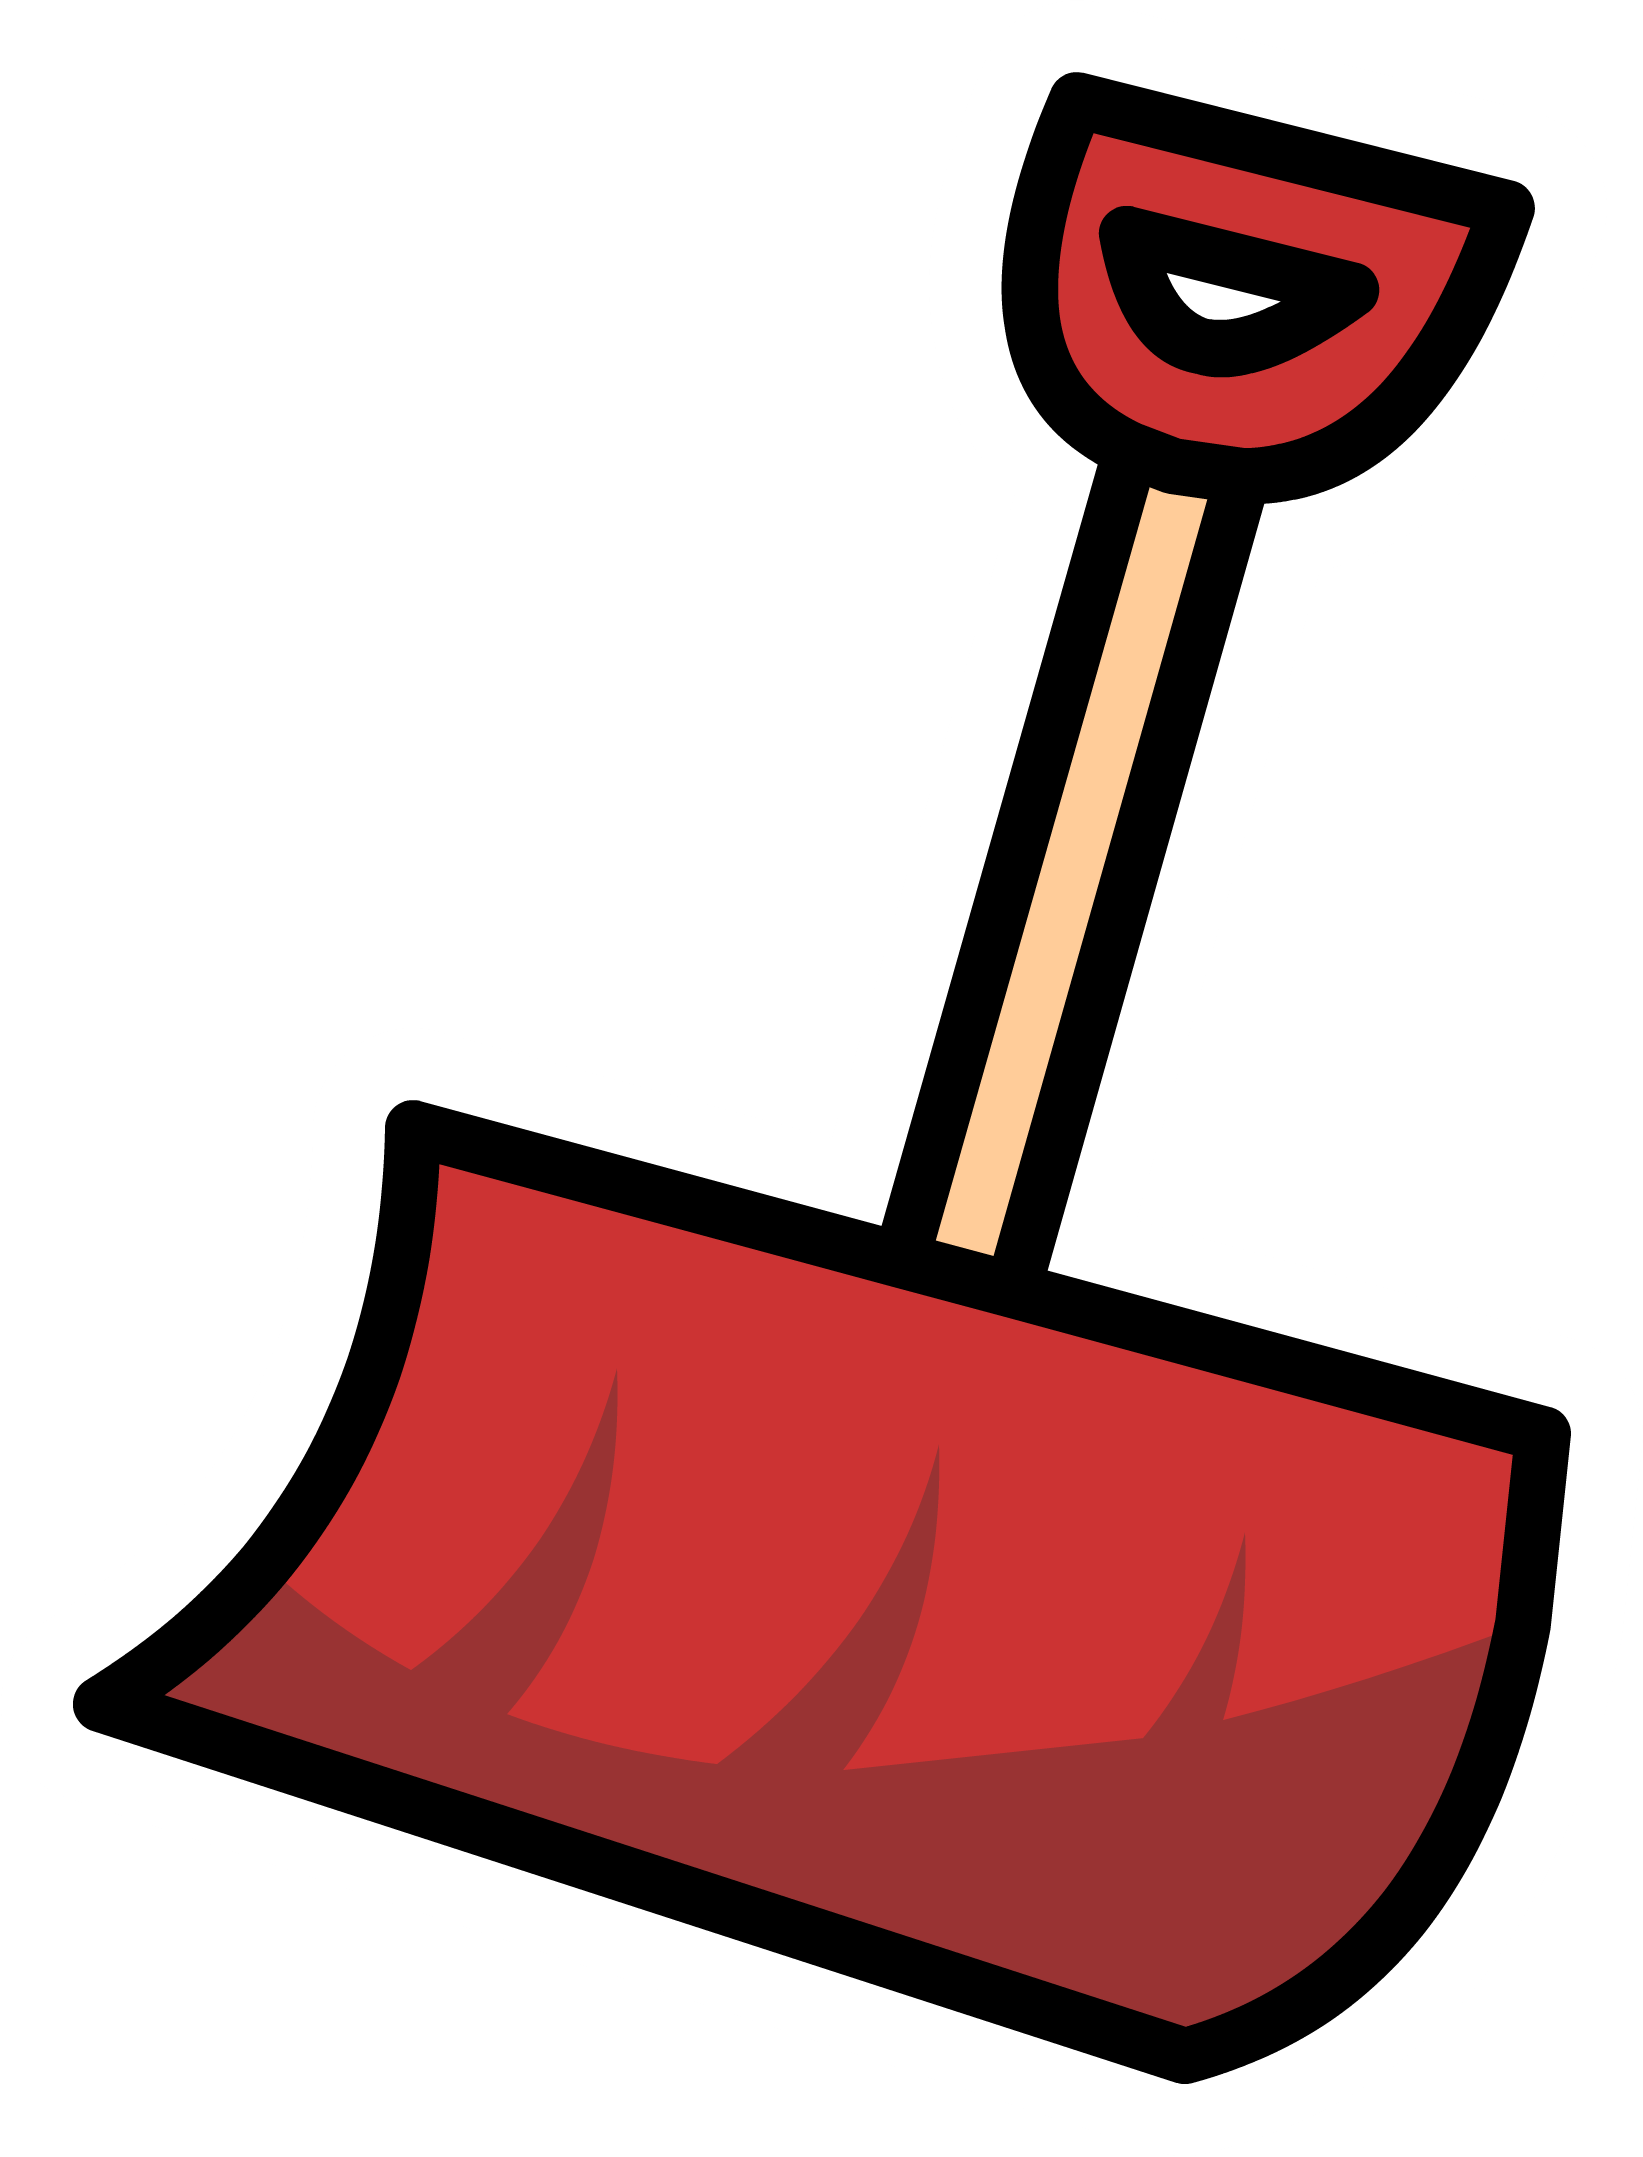 Clipart snow outline. Image red shovel pin